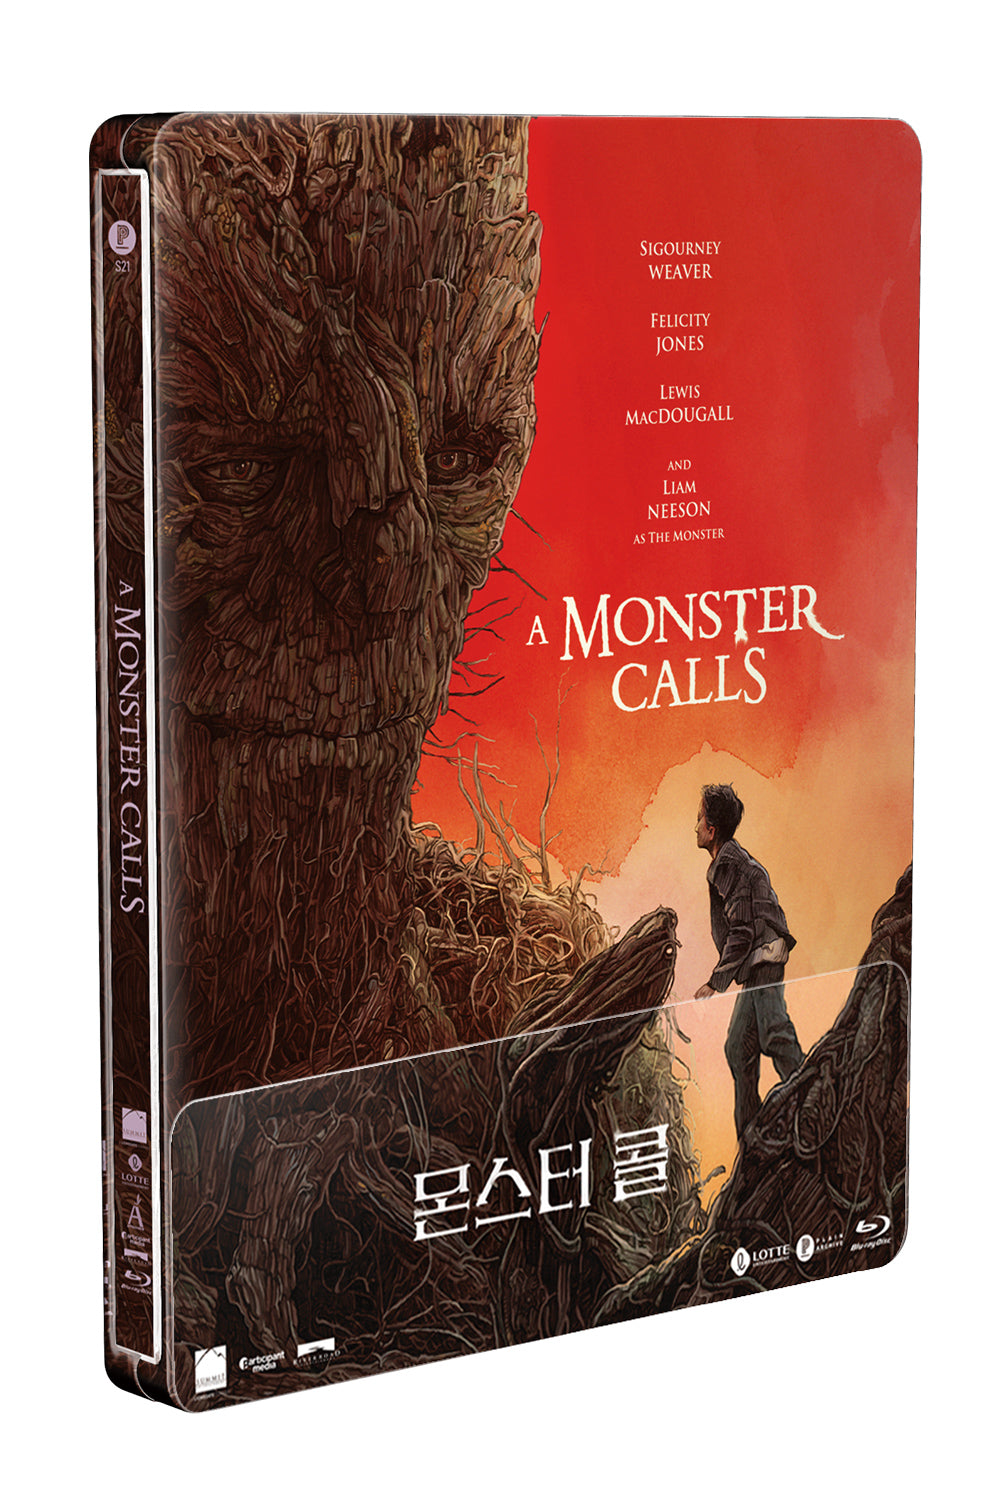 A Monster Calls: Steelbook with 1/4 Slip